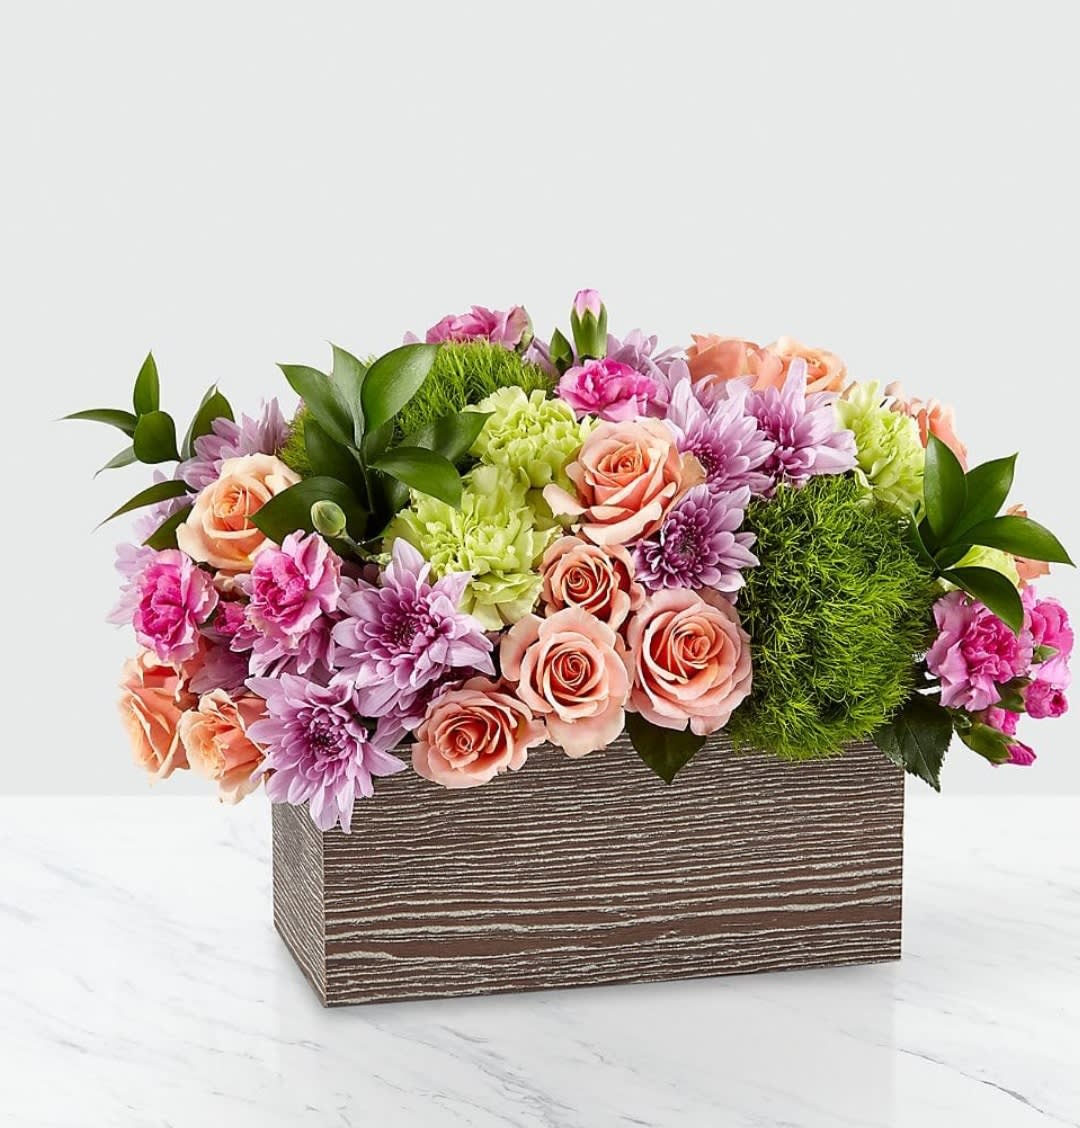 Simple Charm - Capture the beauty of the seasons in bloom with our Simple Charm Bouquet. Gorgeous blooms such as peach spray roses, green trick dianthus, pink mini carnations and lavender cushion pompons fill a weathered wooden box with freshness. Whether you're saying thank you to a special friend or sharing the most heartfelt get-well message, this arrangement is a breathtaking gift for your loved ones to cherish. - GOOD bouquet is approximately 8&quot;H x 13&quot;W - BETTER bouquet is approximately 9&quot;H x 14&quot;W - BEST bouquet is approximately 10&quot;H x 15&quot;W